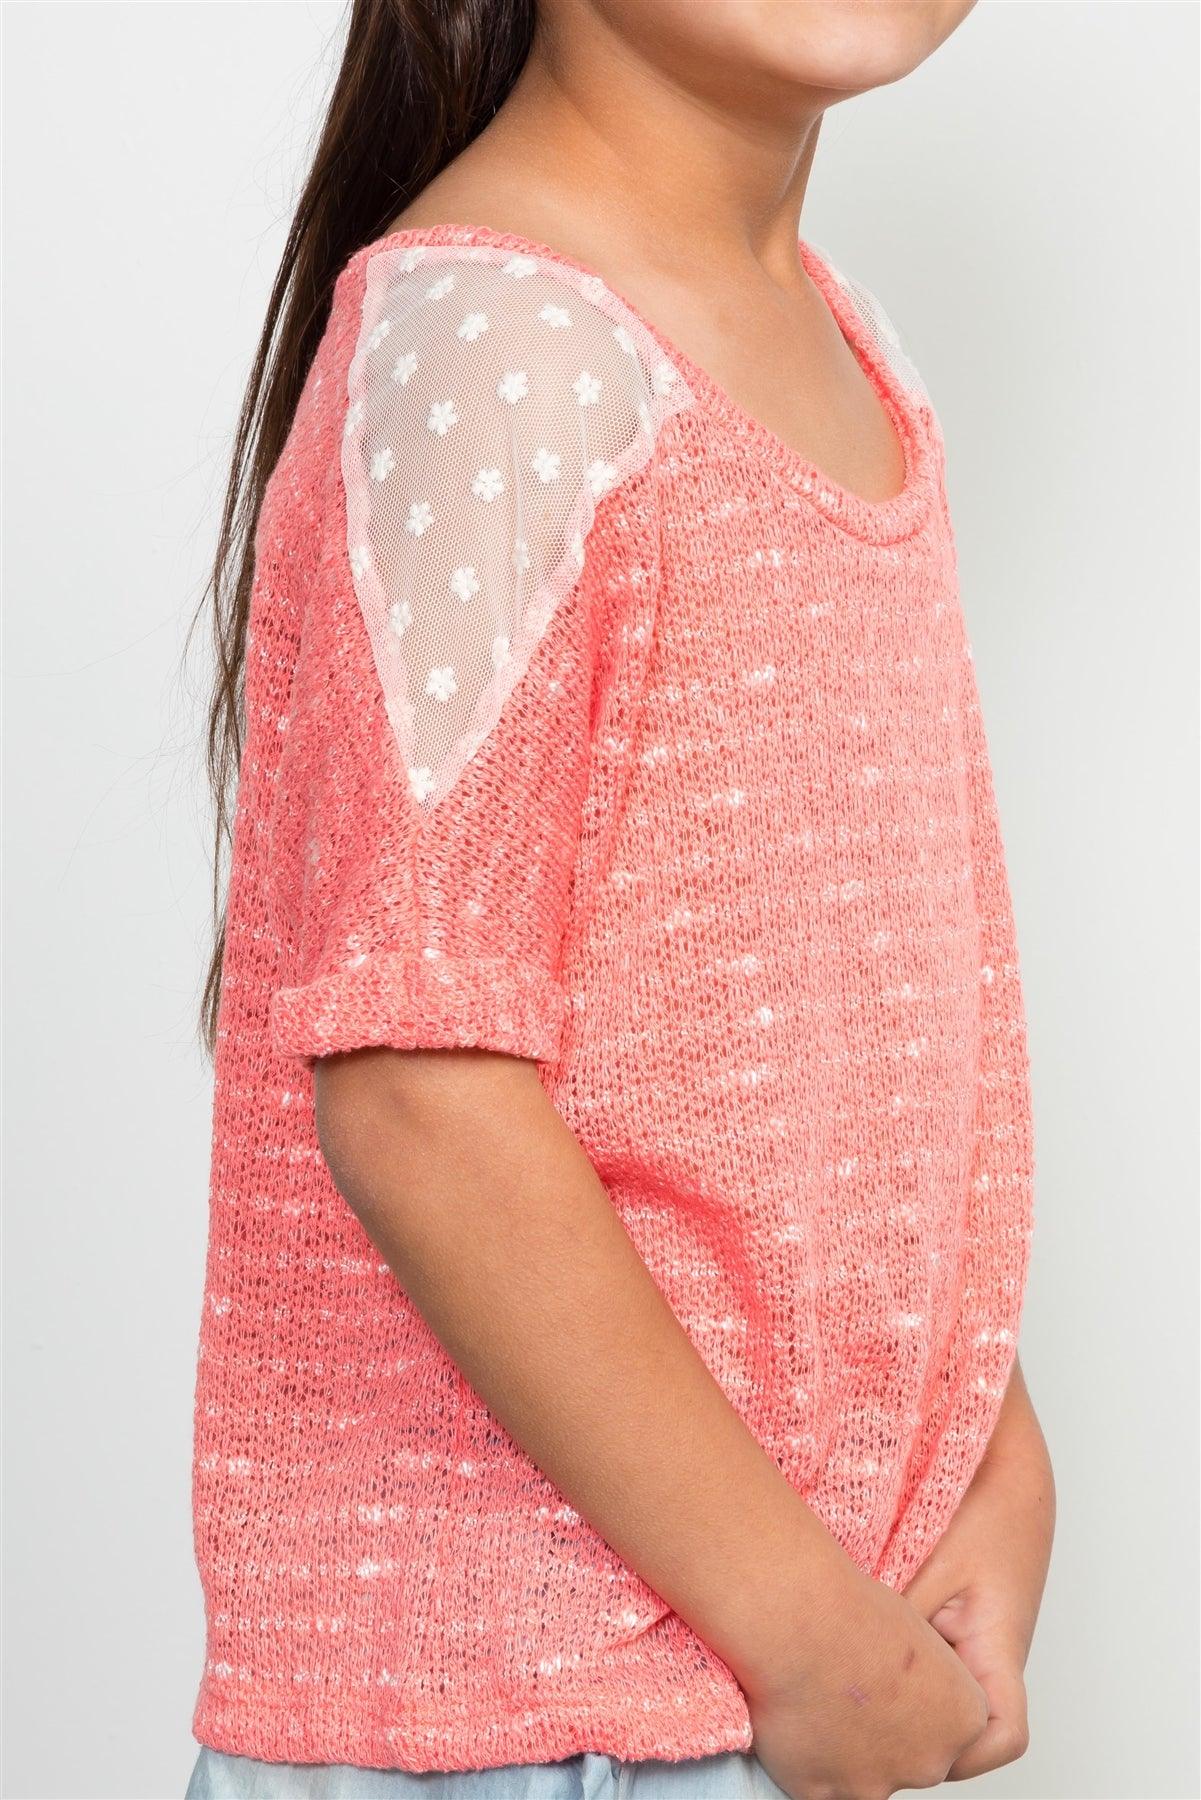 Girls Coral Knit Short Sleeve Top WIth Mesh Shoulder / 1-2-2-1